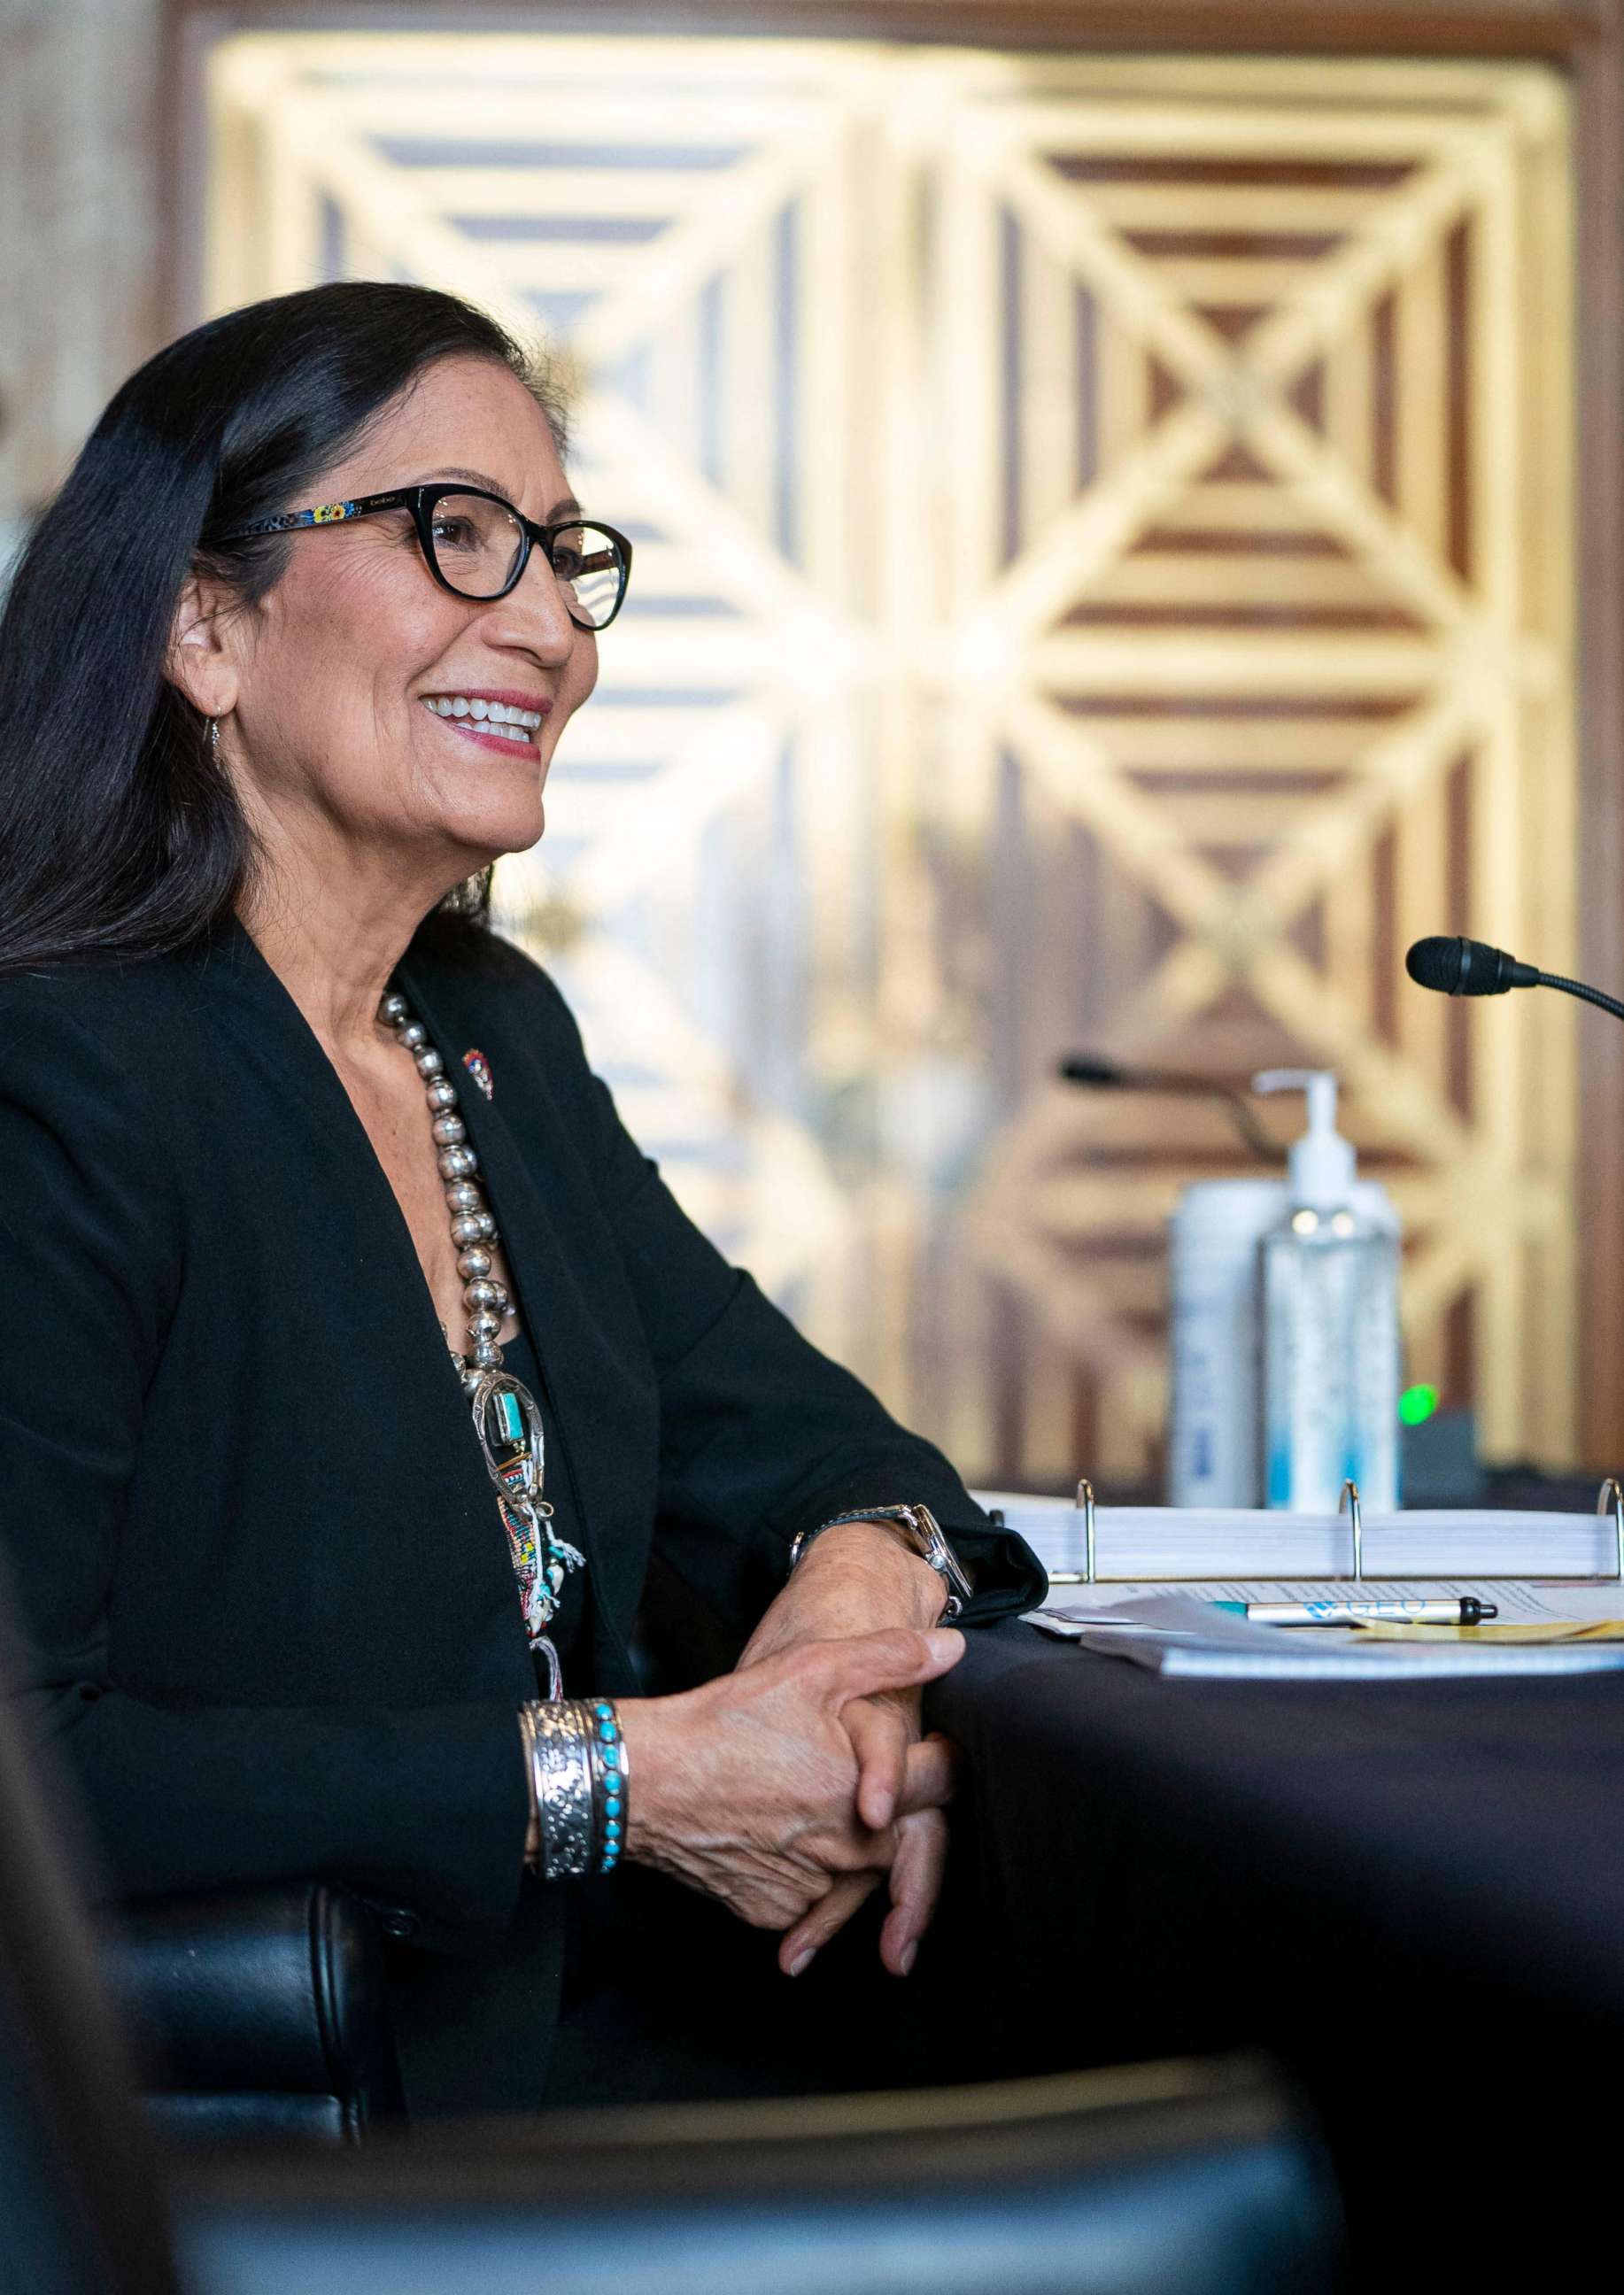 PHOTO: Secretary of the interior nominee Rep. Deb Haaland testifies during a Senate Energy and Natural Resources Committee confirmation hearing in Washington, DC on Feb 24, 2021. 